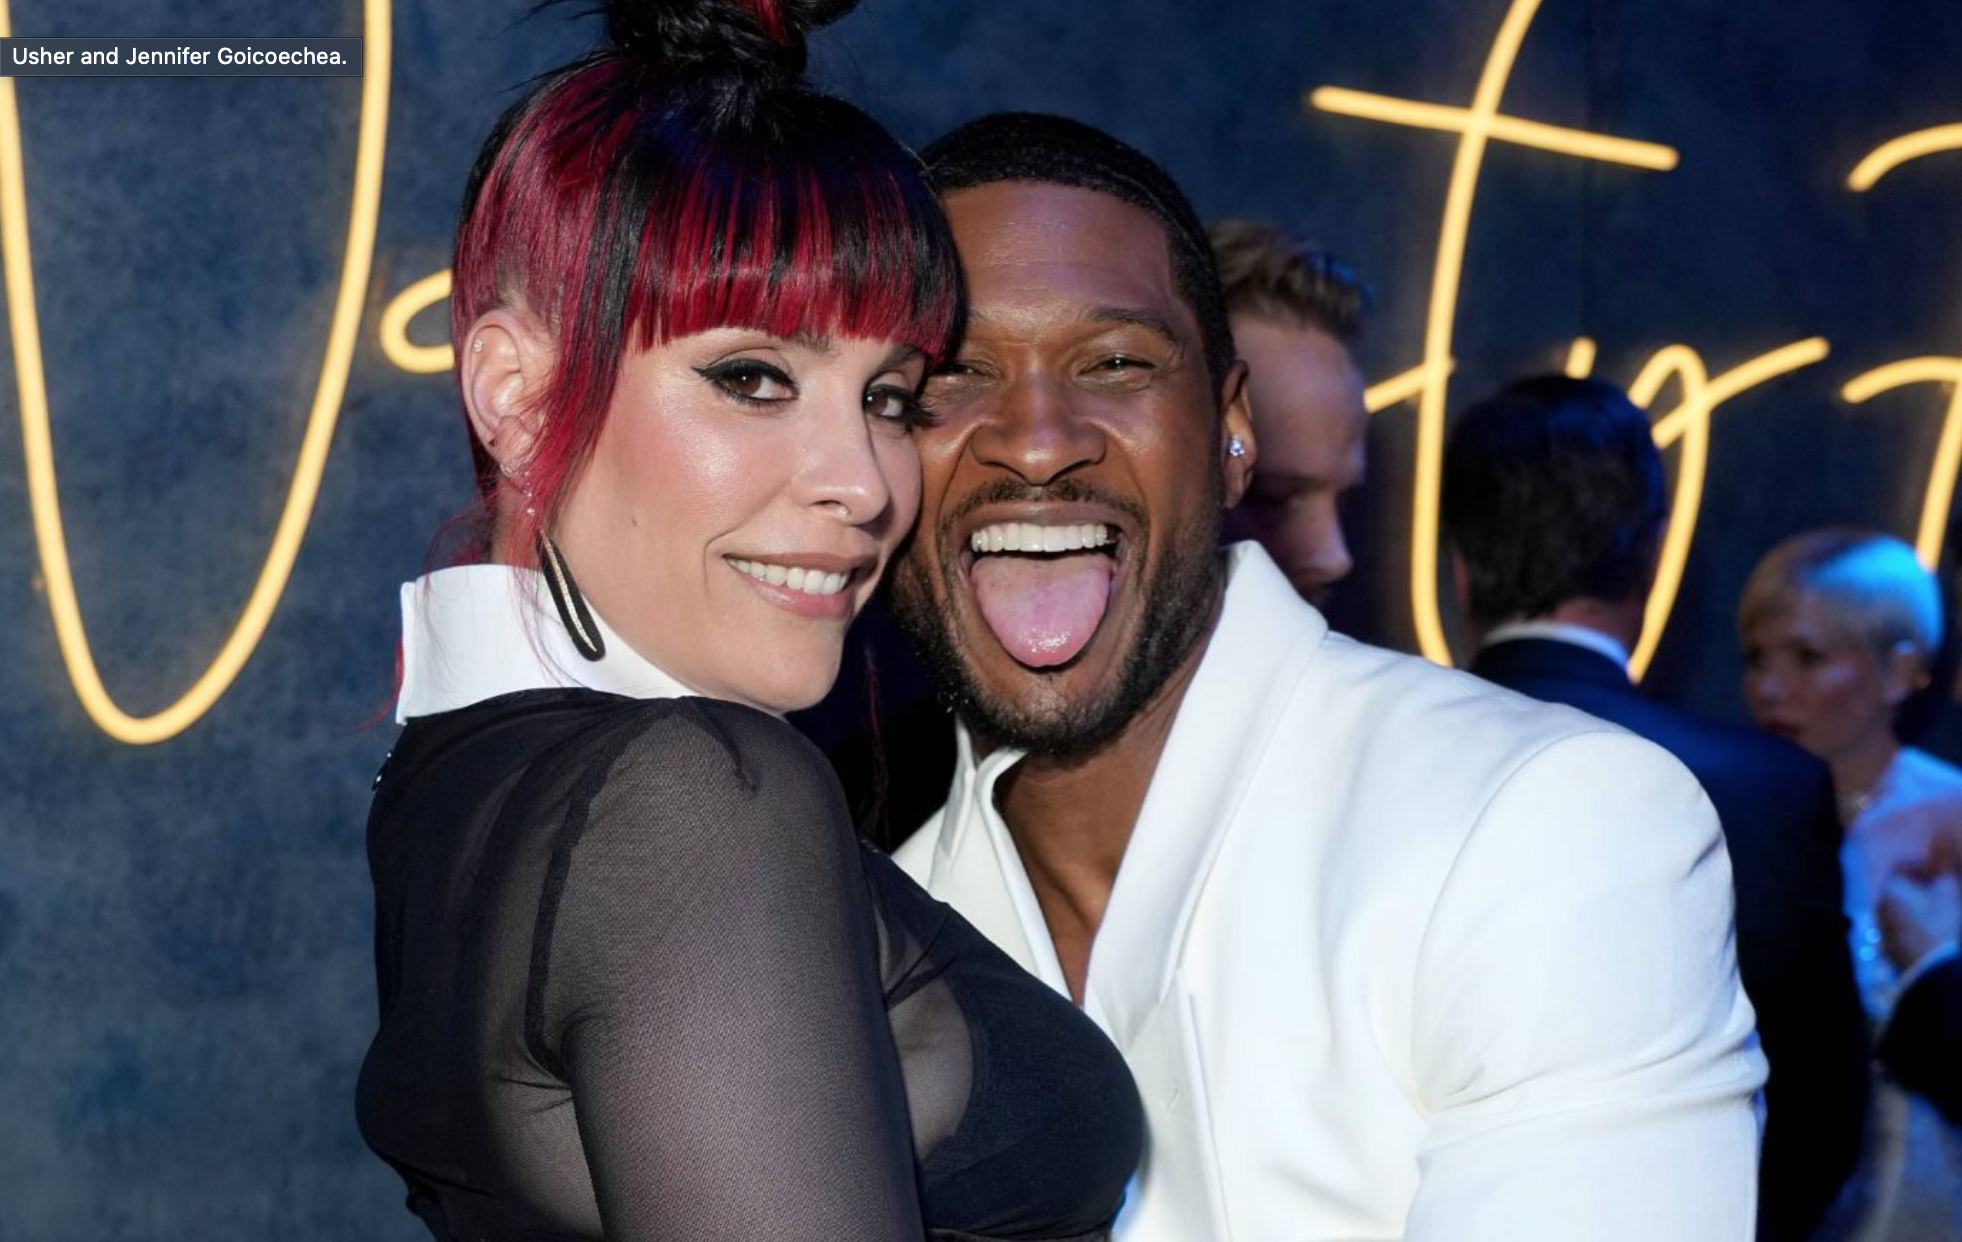 Usher got married straight after the Super Bowl